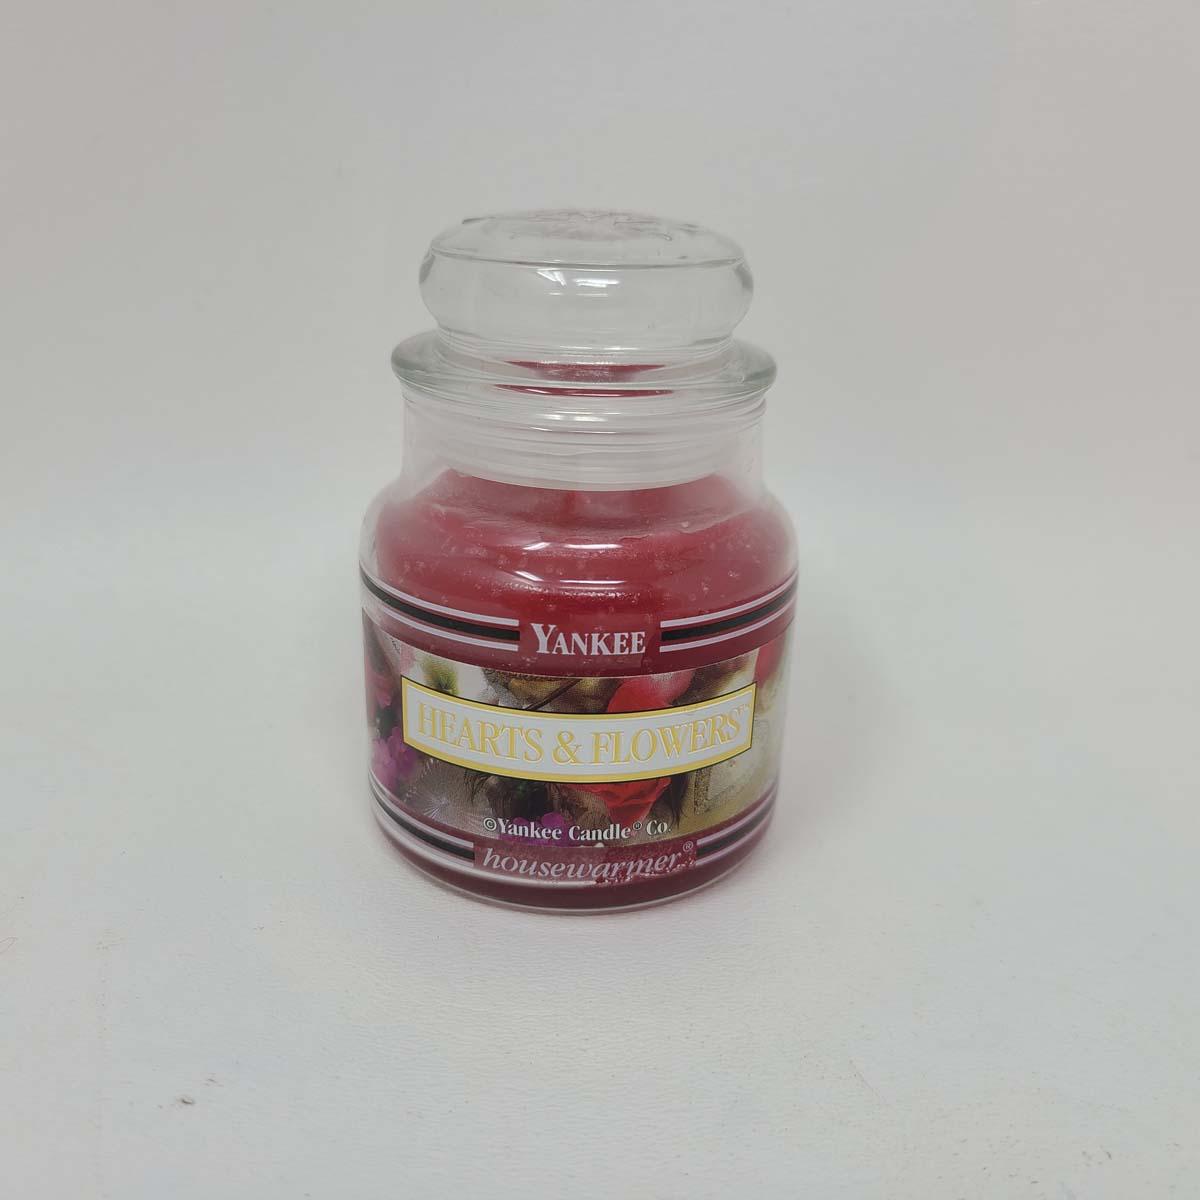 At Auction: 7 Yankee Candles- 1 used